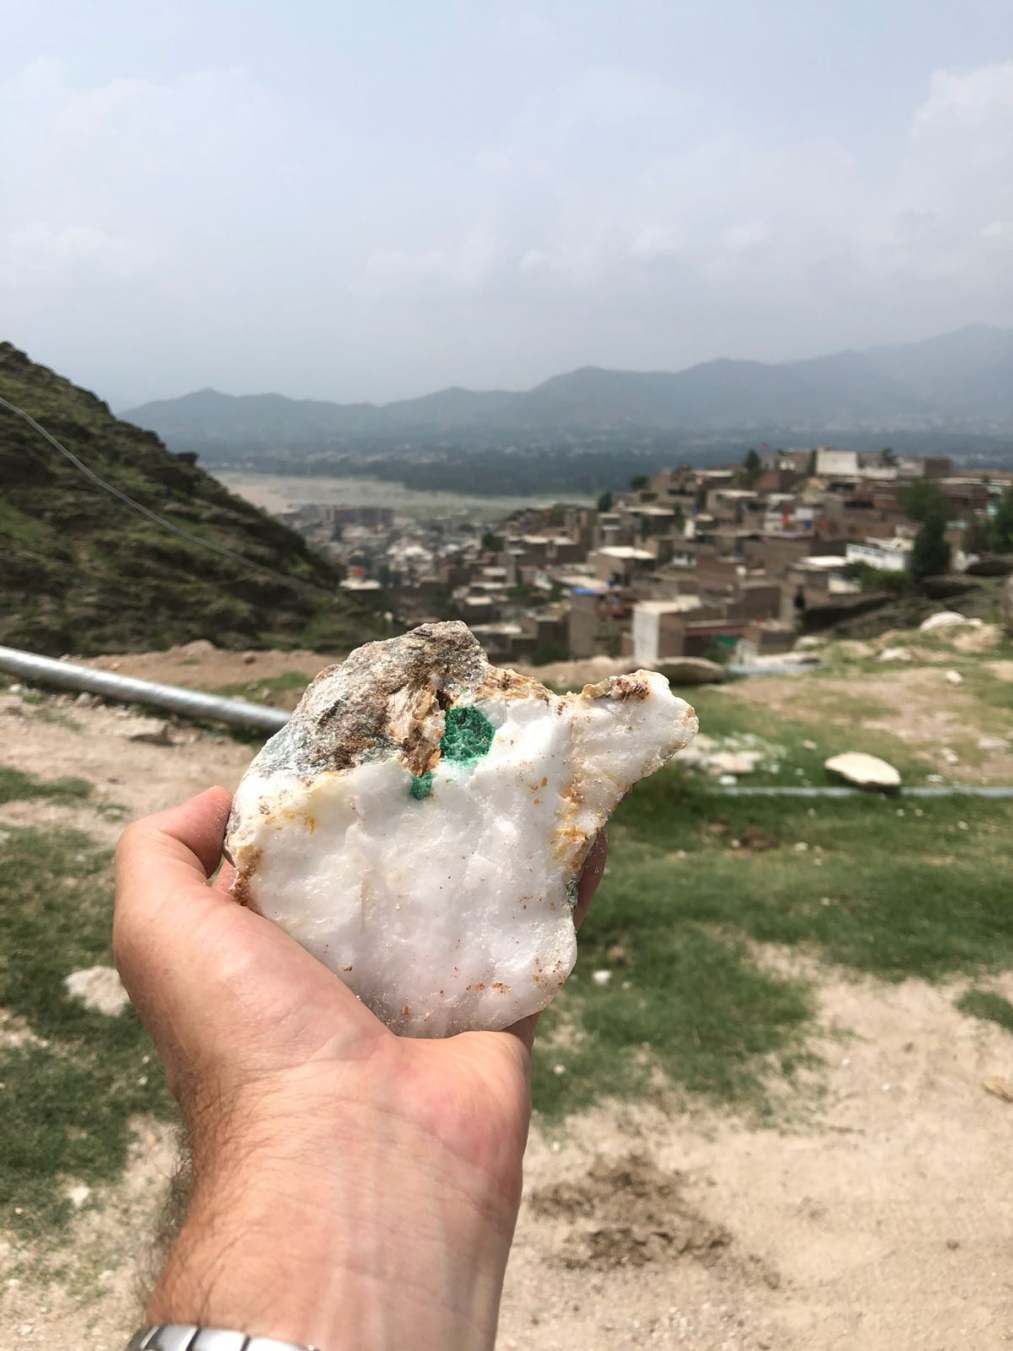 Emerald in the rough, Swat Valley